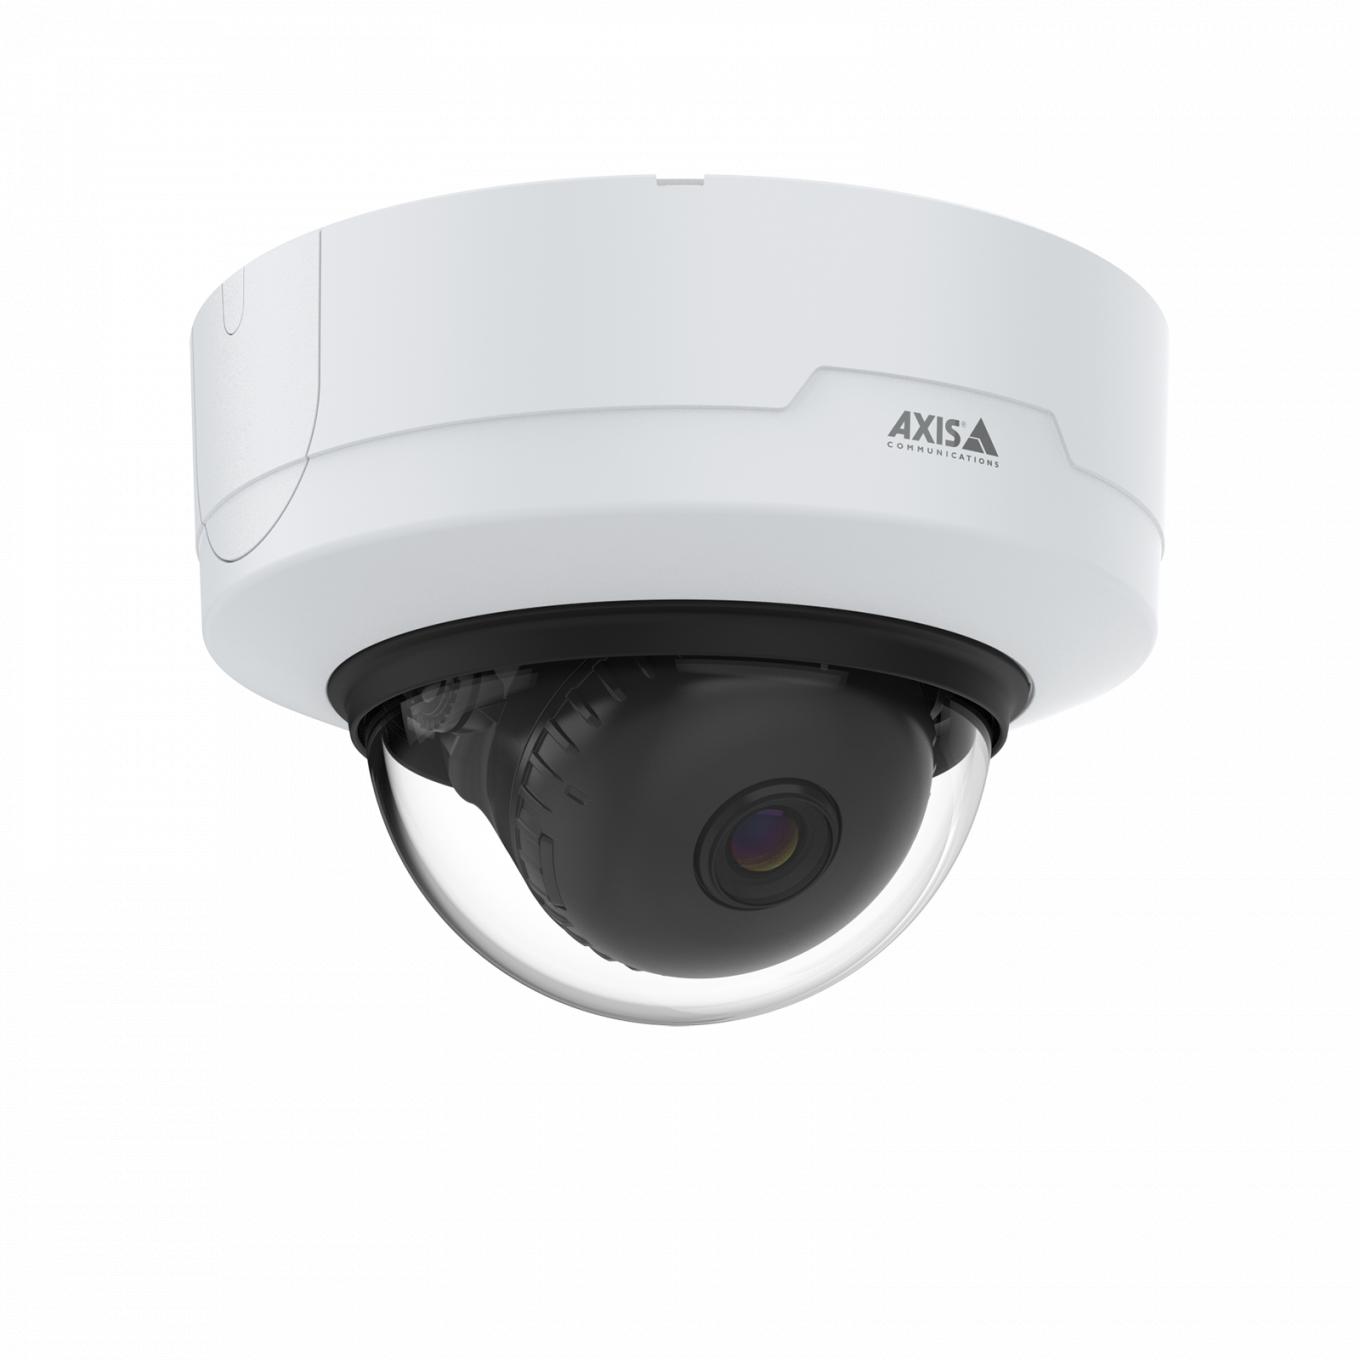 AXIS P3265-V Dome camera mounted in ceiling from right